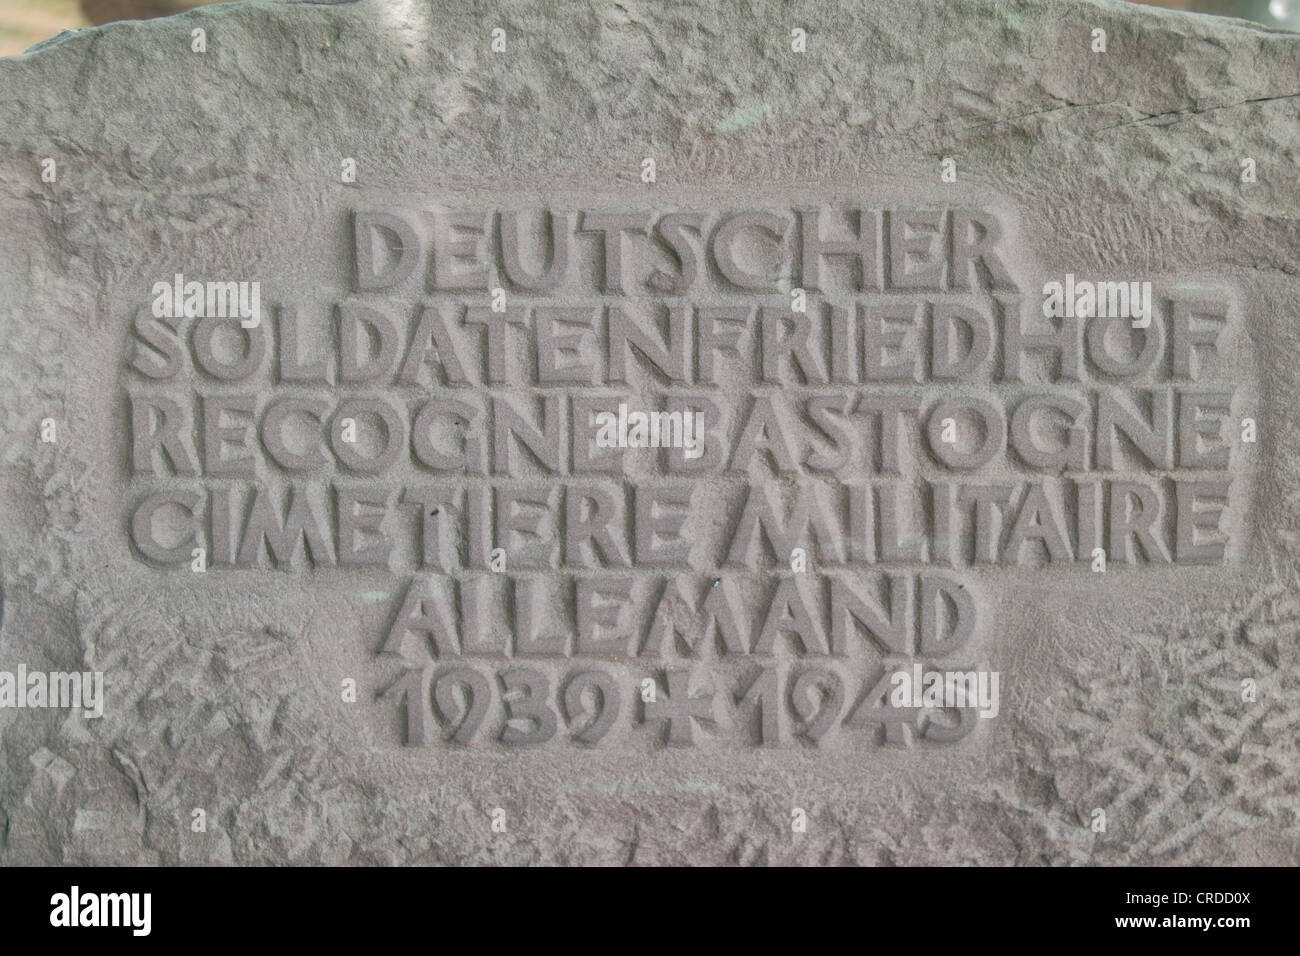 Close up of cemetery entrance name plate in the World War Two German Recogne-Bastogne Cemetery, Belgium. Stock Photo